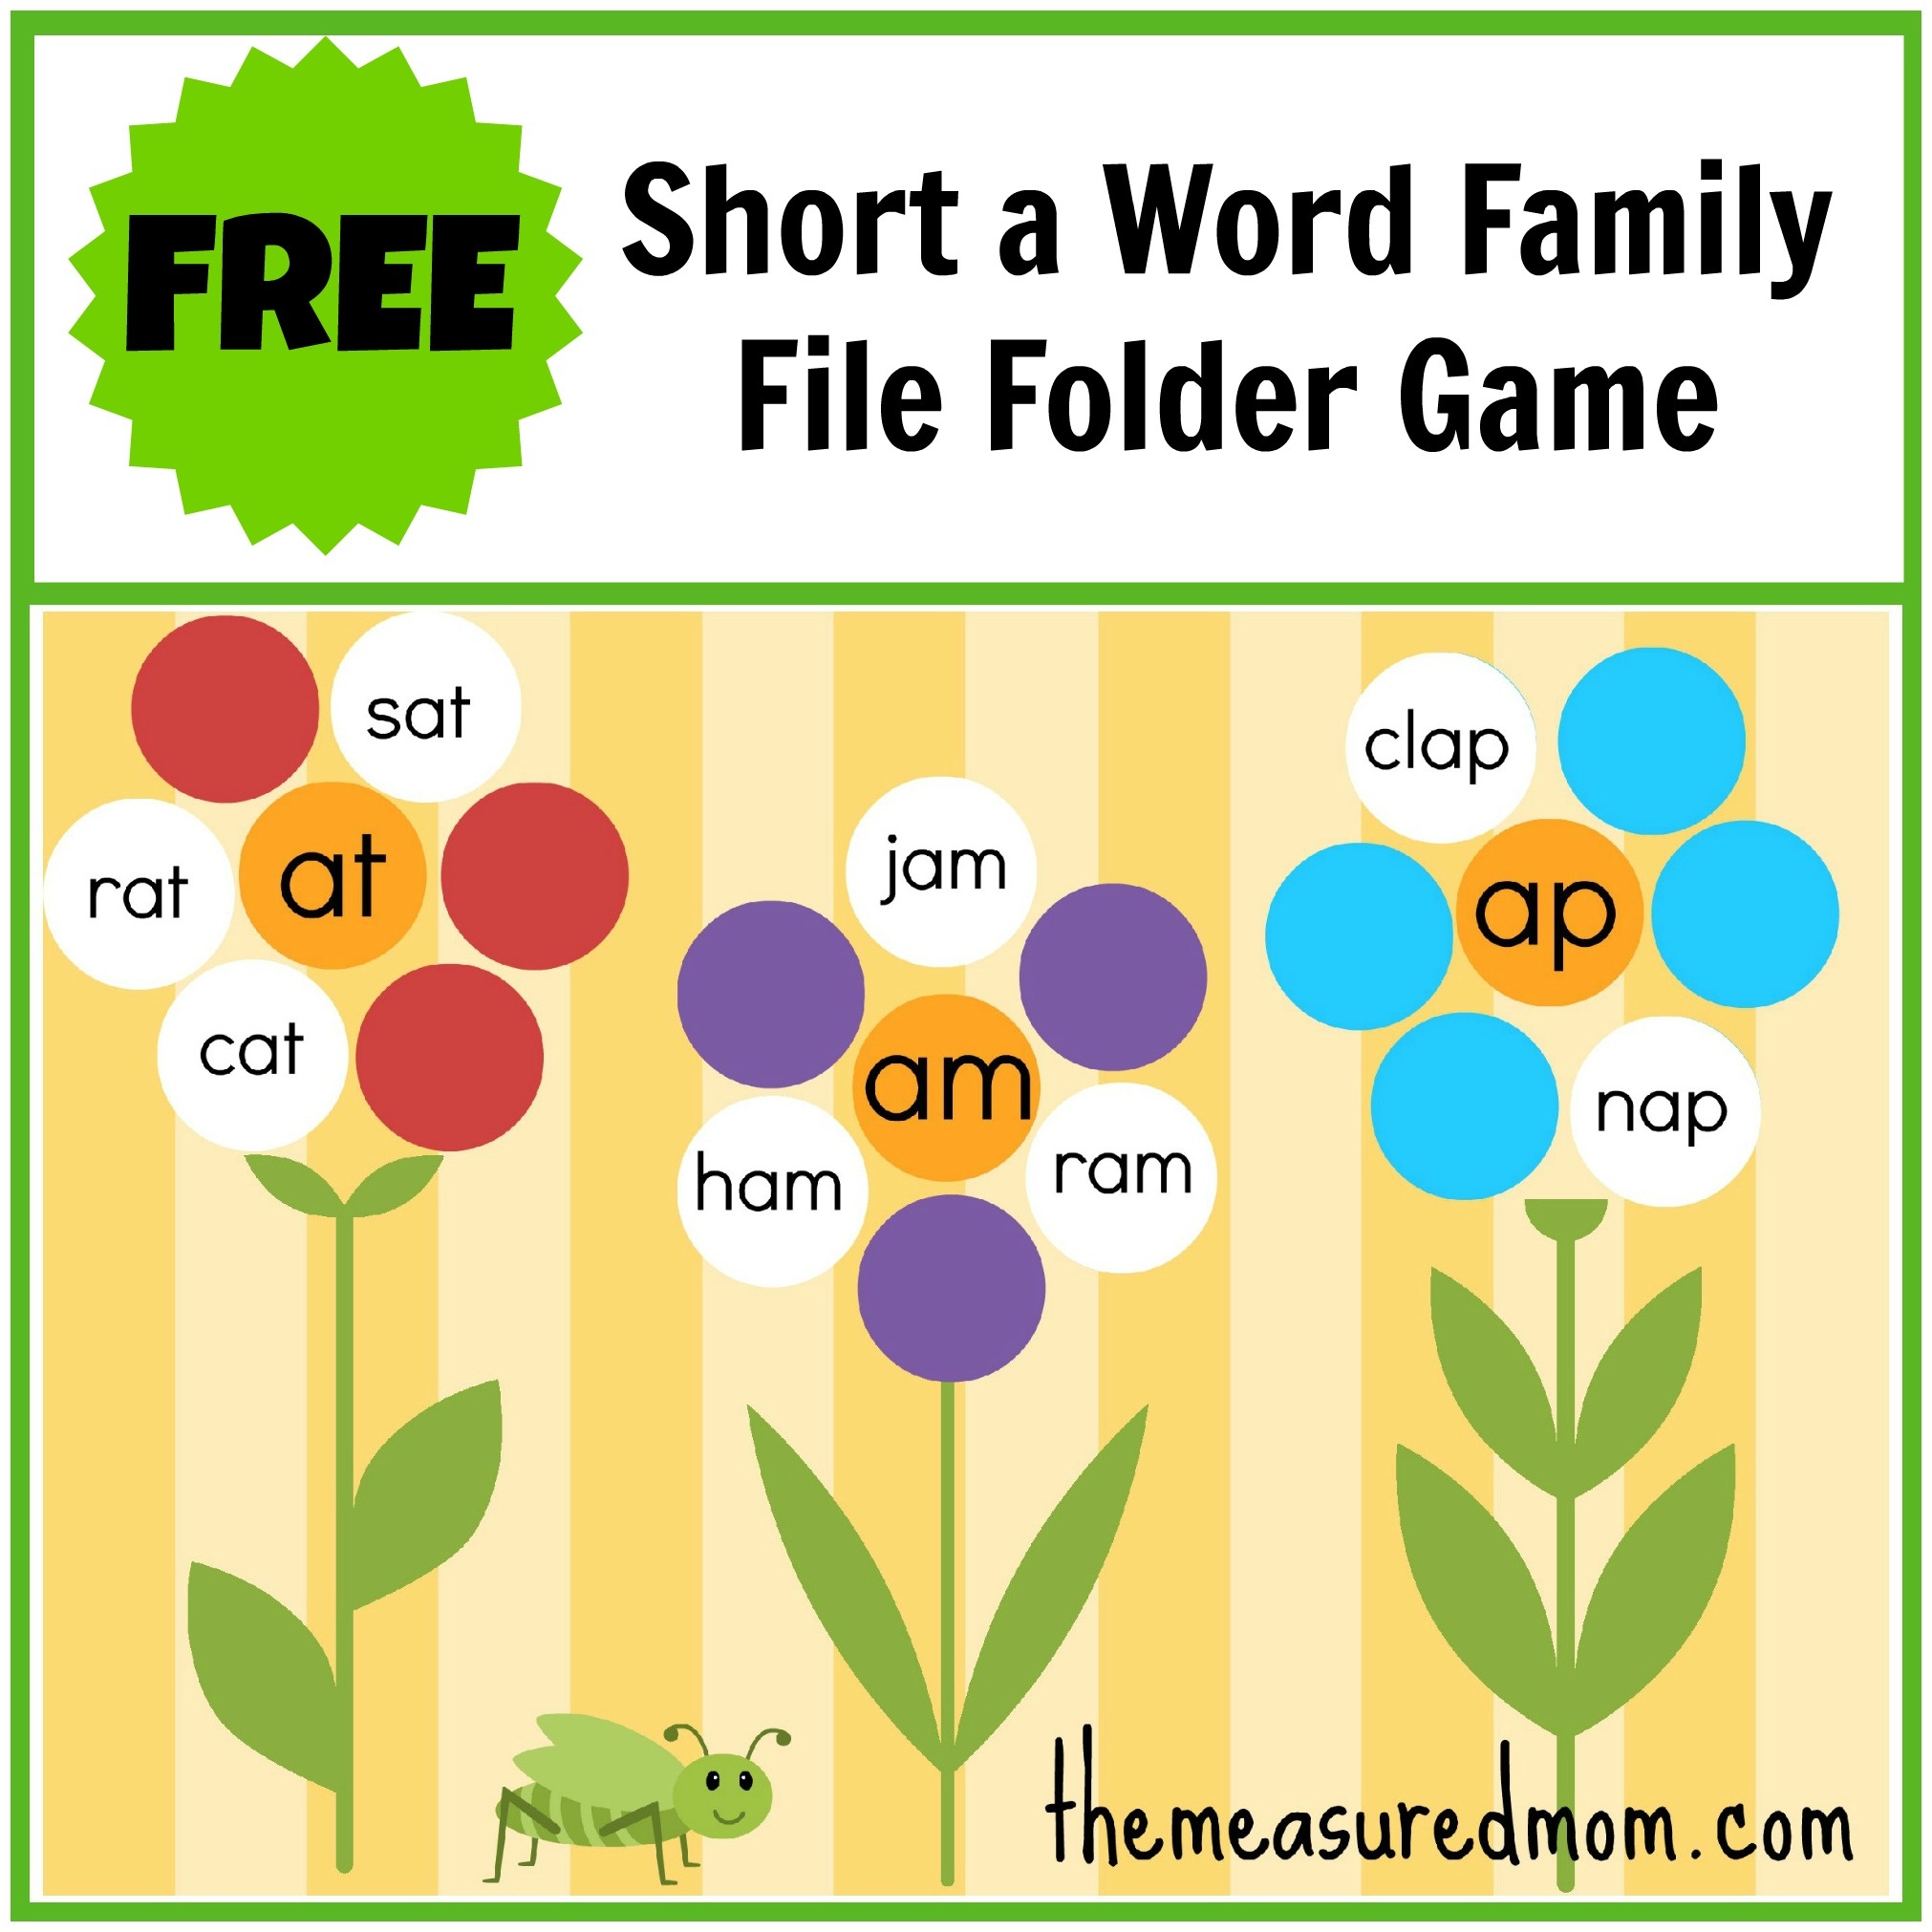 Free Word Family File Folder Game: Short A - The Measured Mom - File Folder Games For Toddlers Free Printable